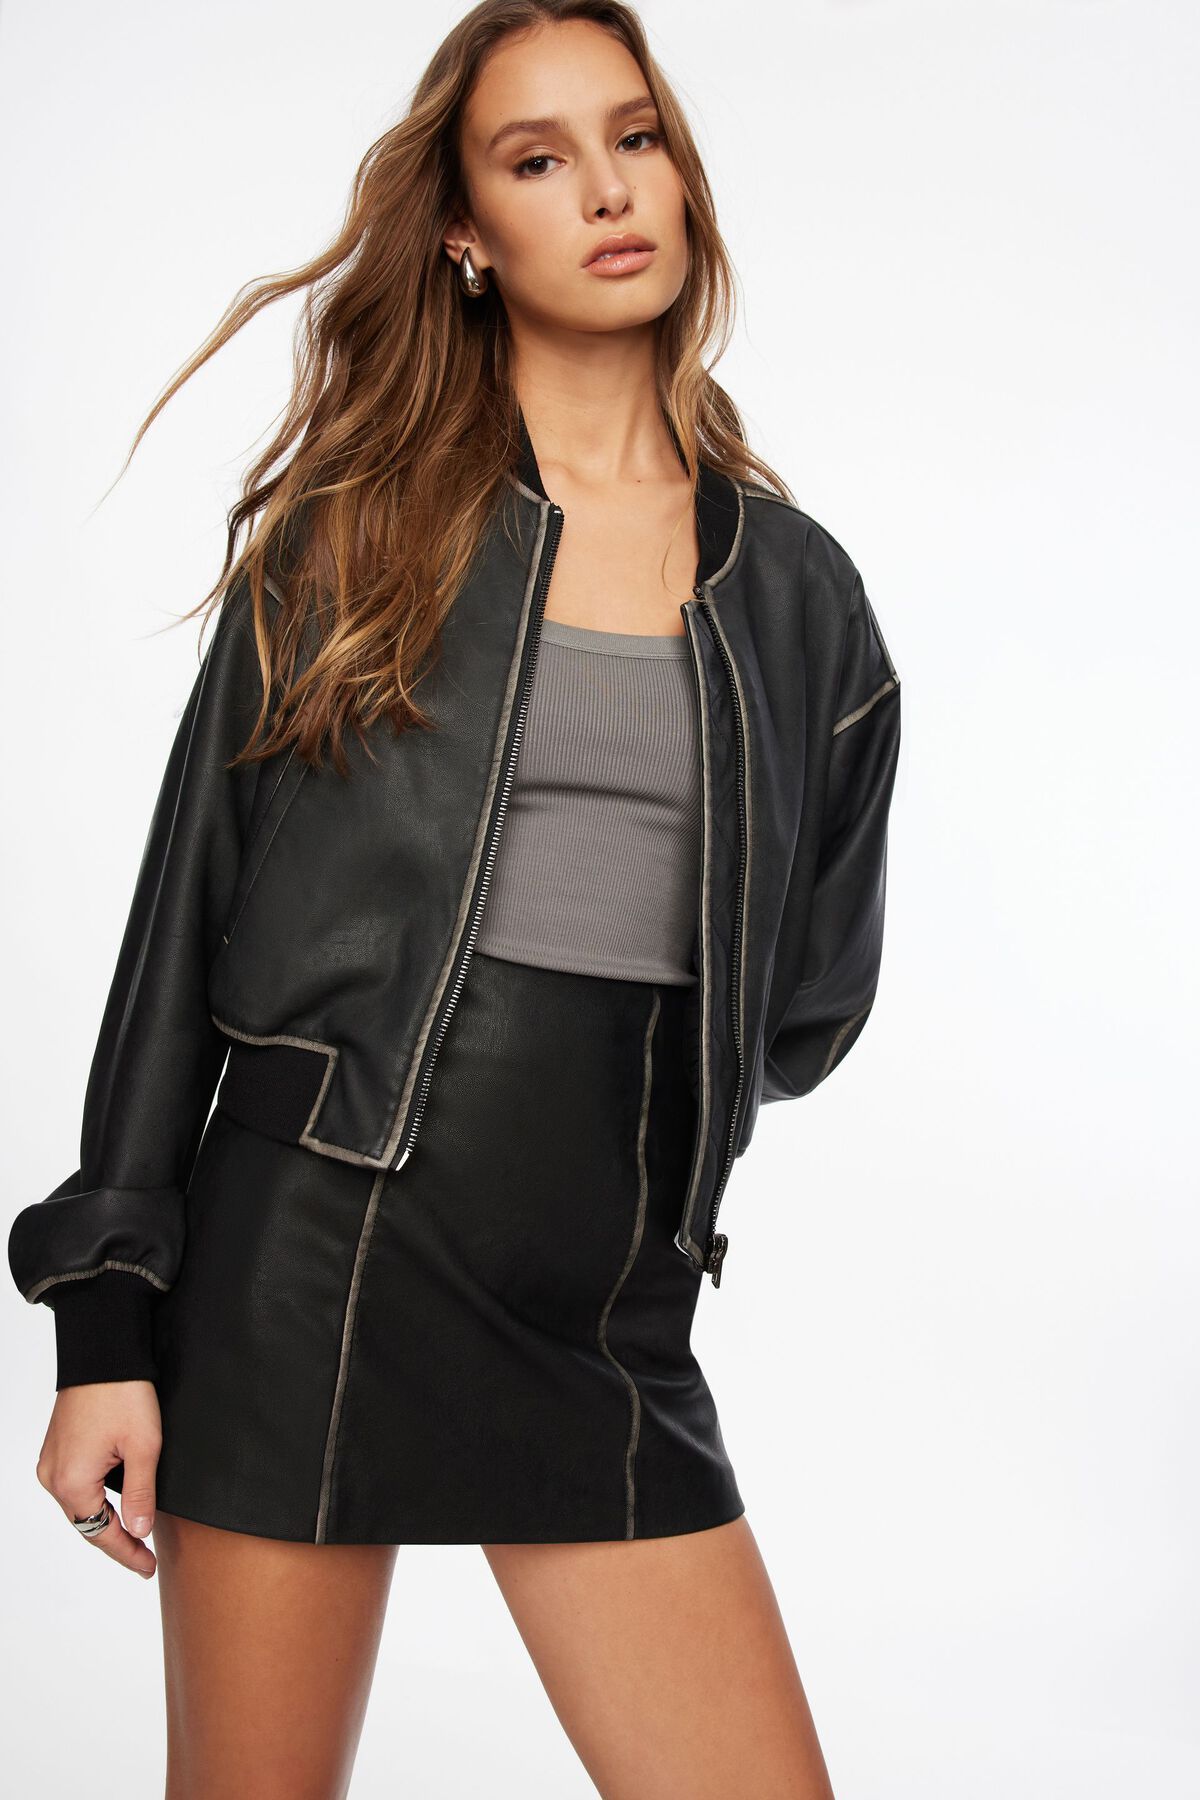 black mock neck tank top with black leather jacket and jeans